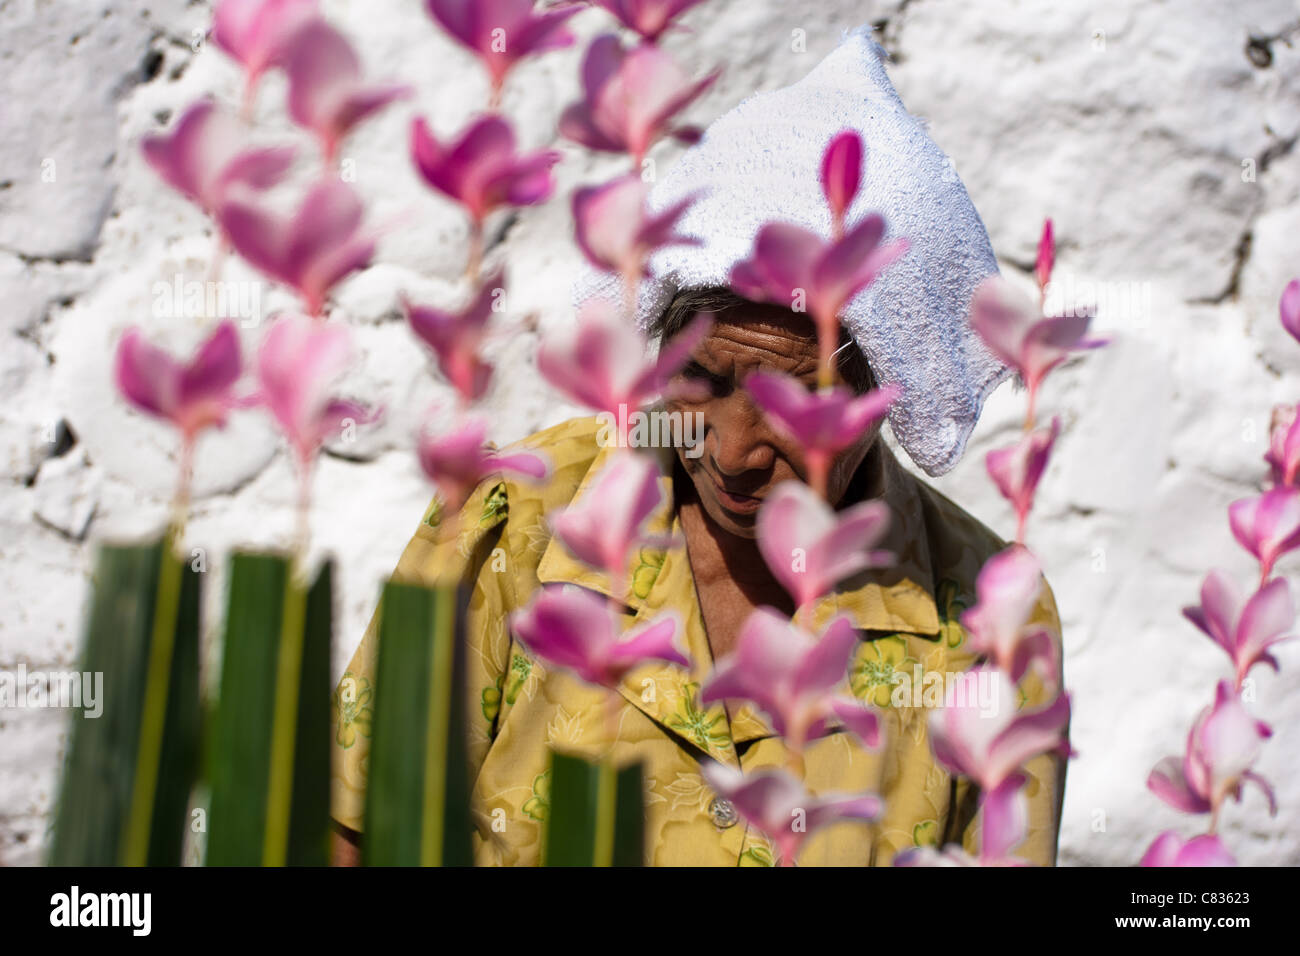 A Salvadoran woman seen through palm branches during the procession of the Flower & Palm Festival in El Salvador. Stock Photo